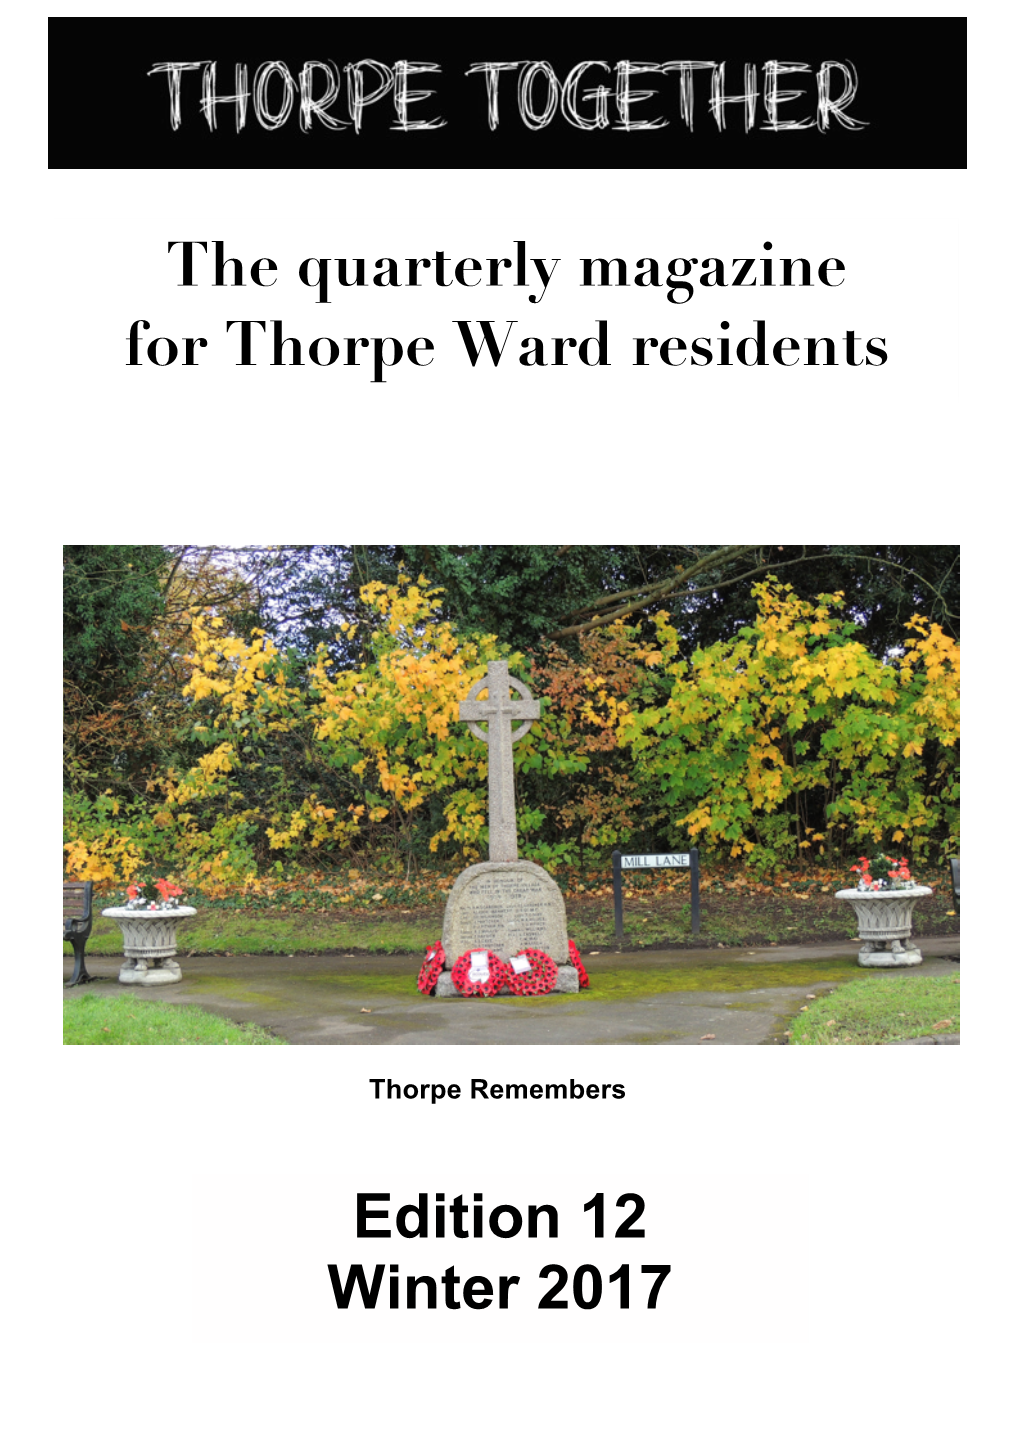 The Quarterly Magazine for Thorpe Ward Residents Edition 12 Winter